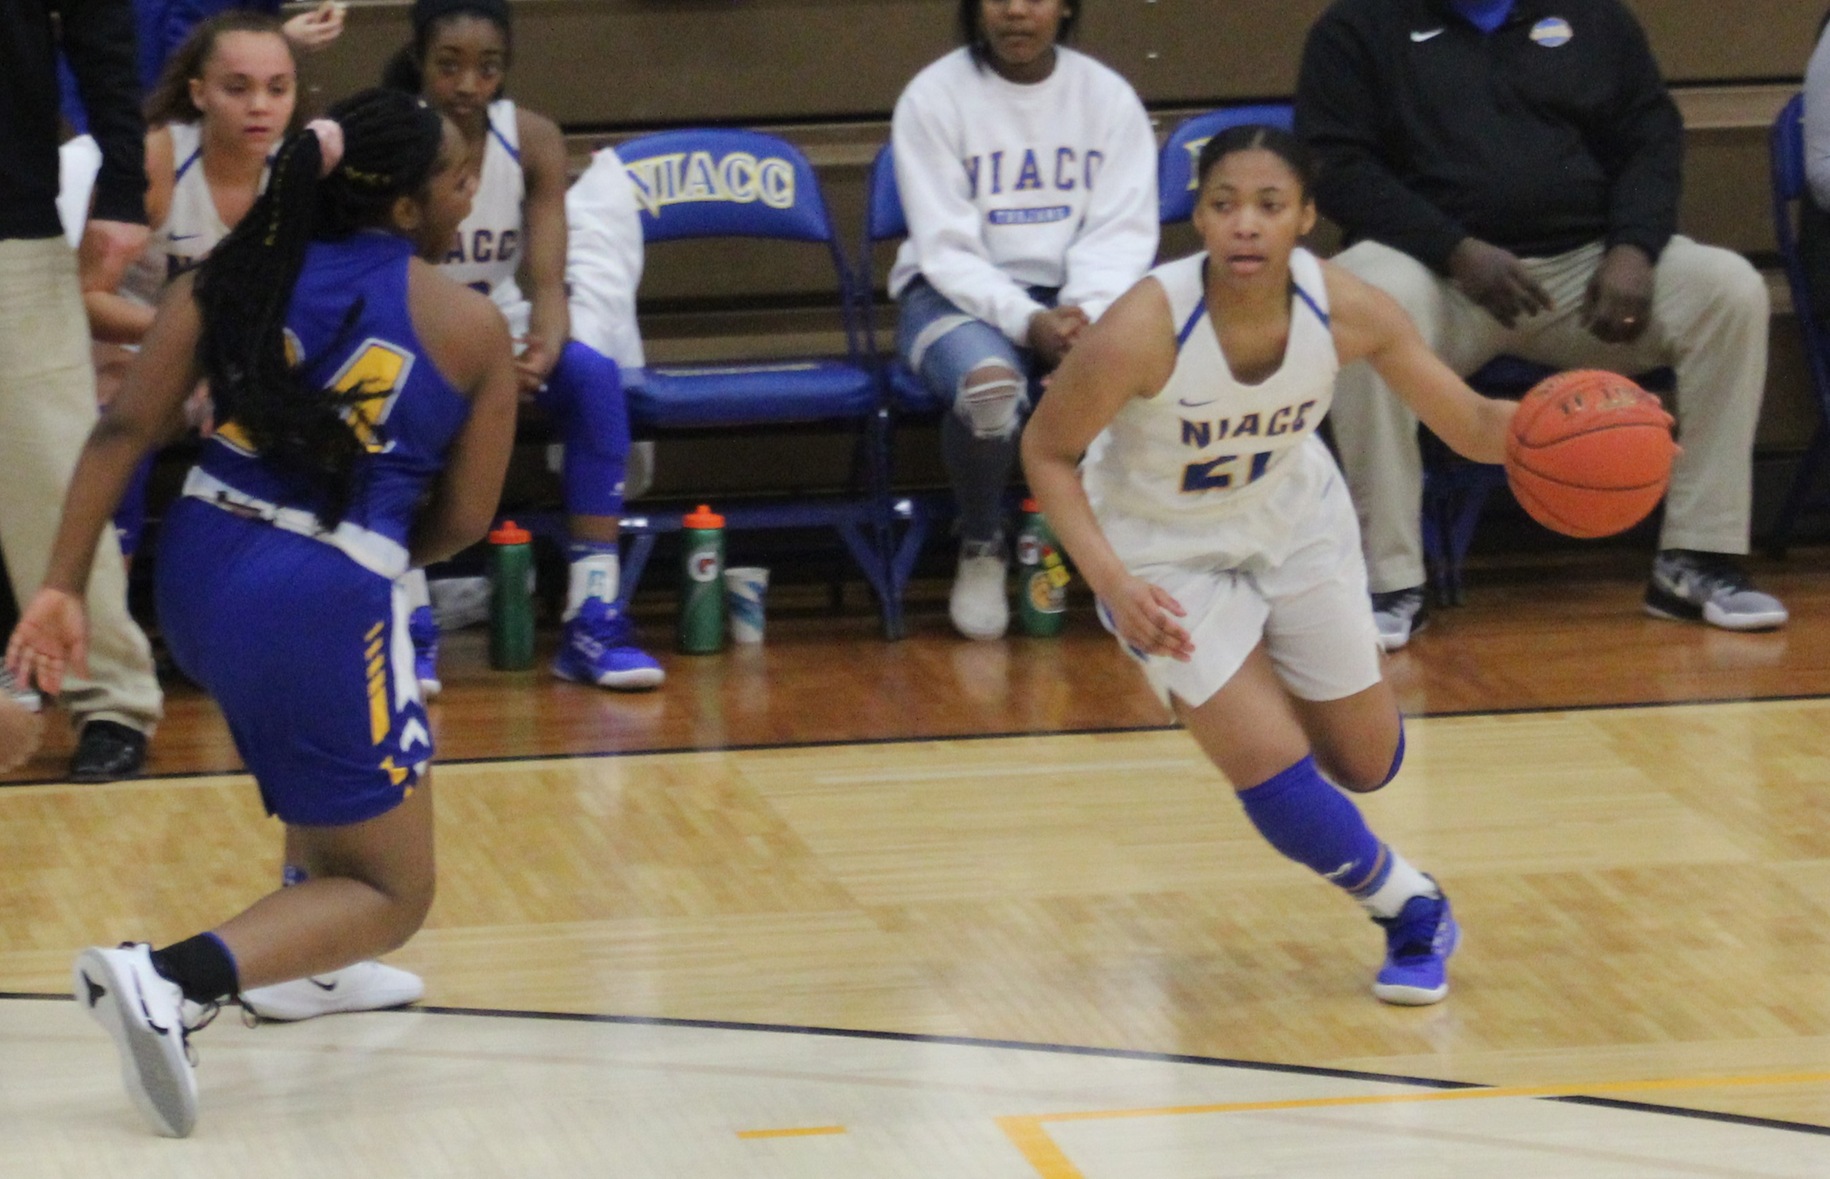 NIACC's Andrea Gray drives to the basket in a game this season against Iowa Lakes.